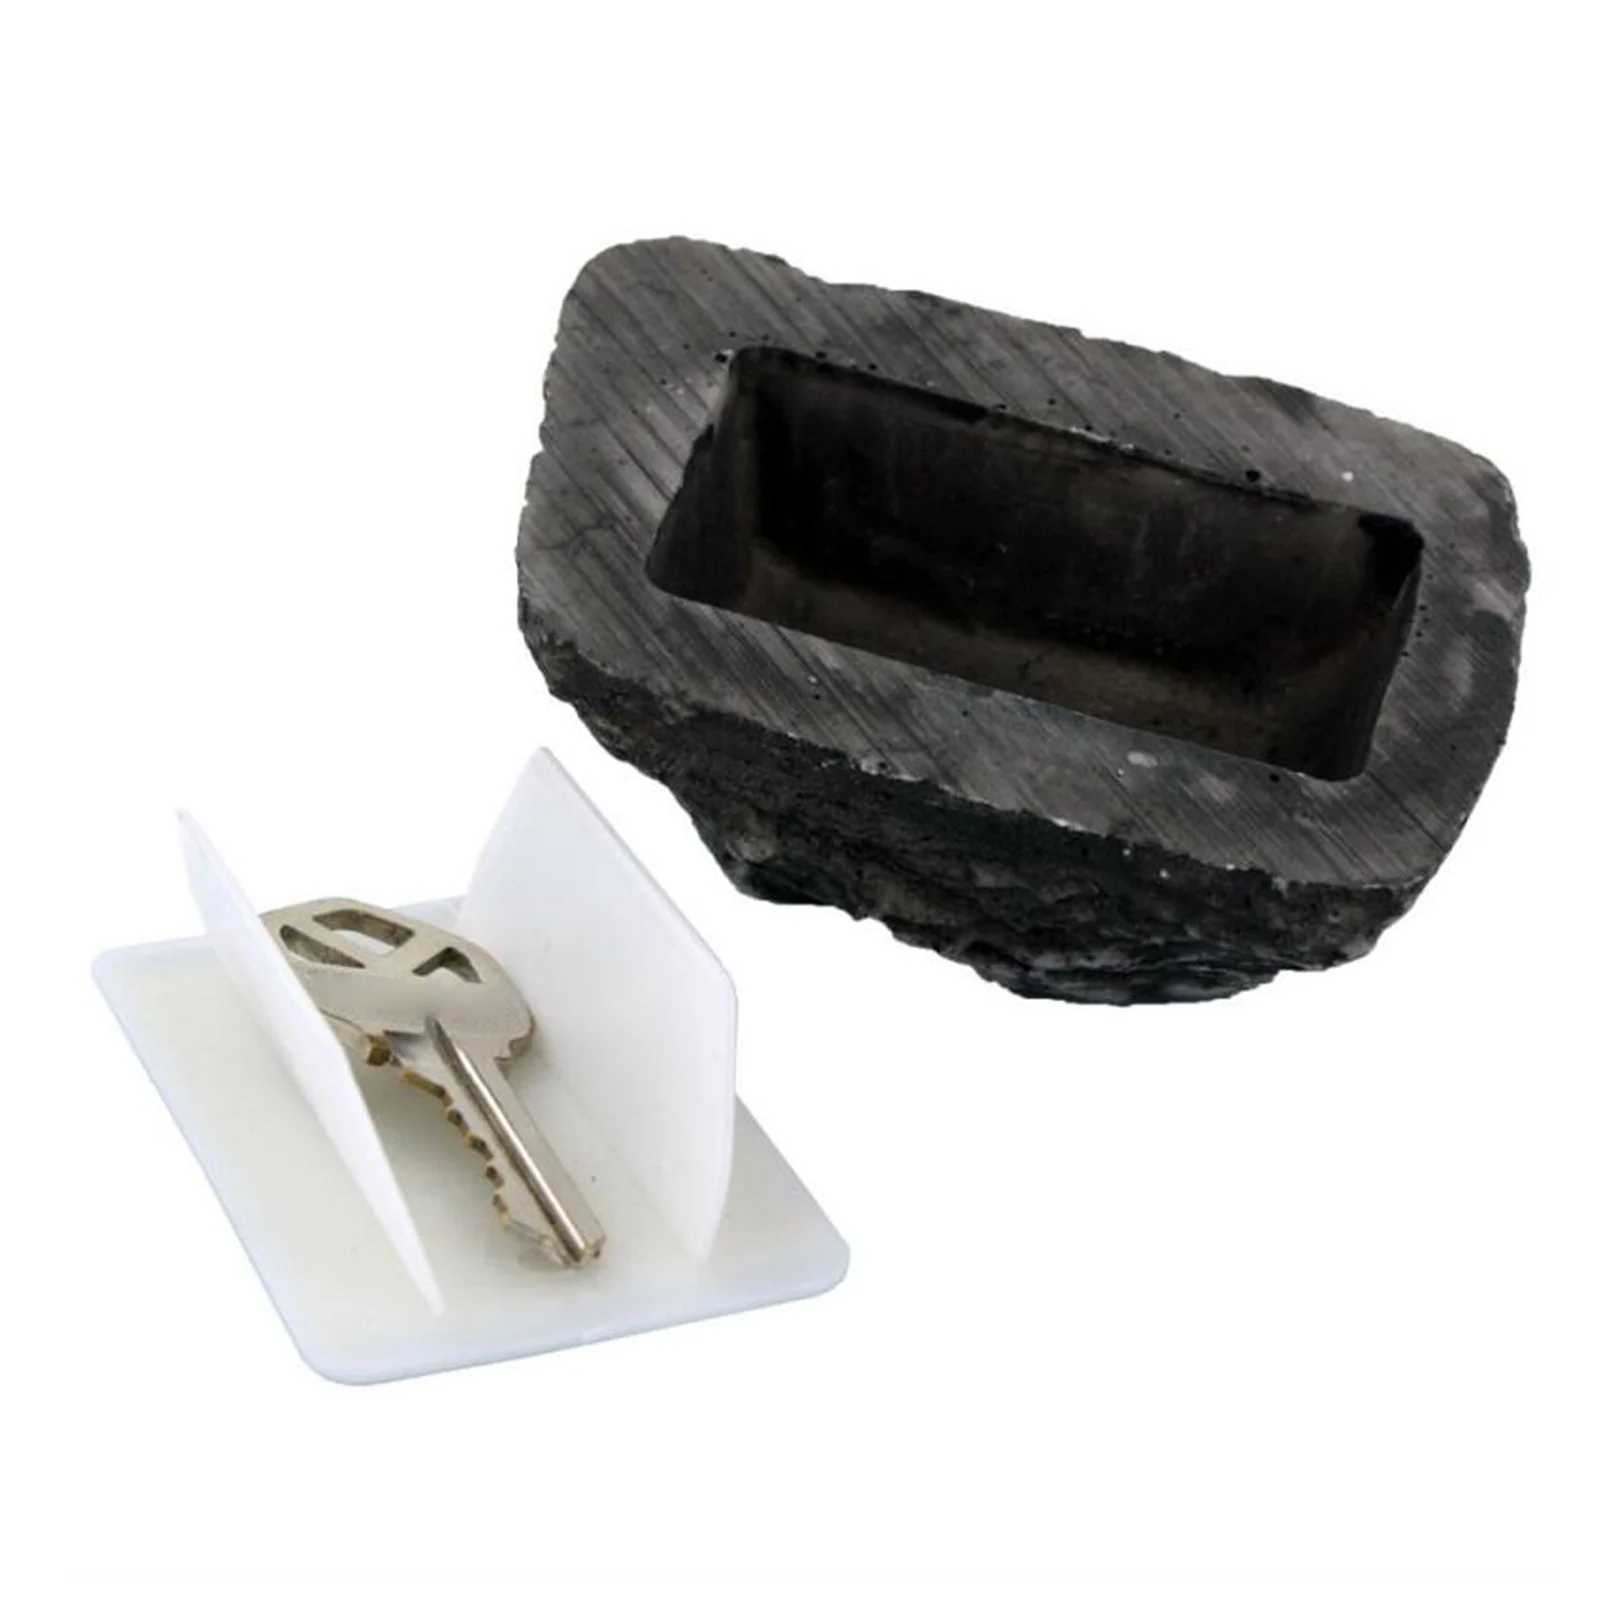 Looks & Feels Like Real Stone Hide-a-Spare-Key Fake Rock Safe for Outdoor Garden or Yard Geocaching 